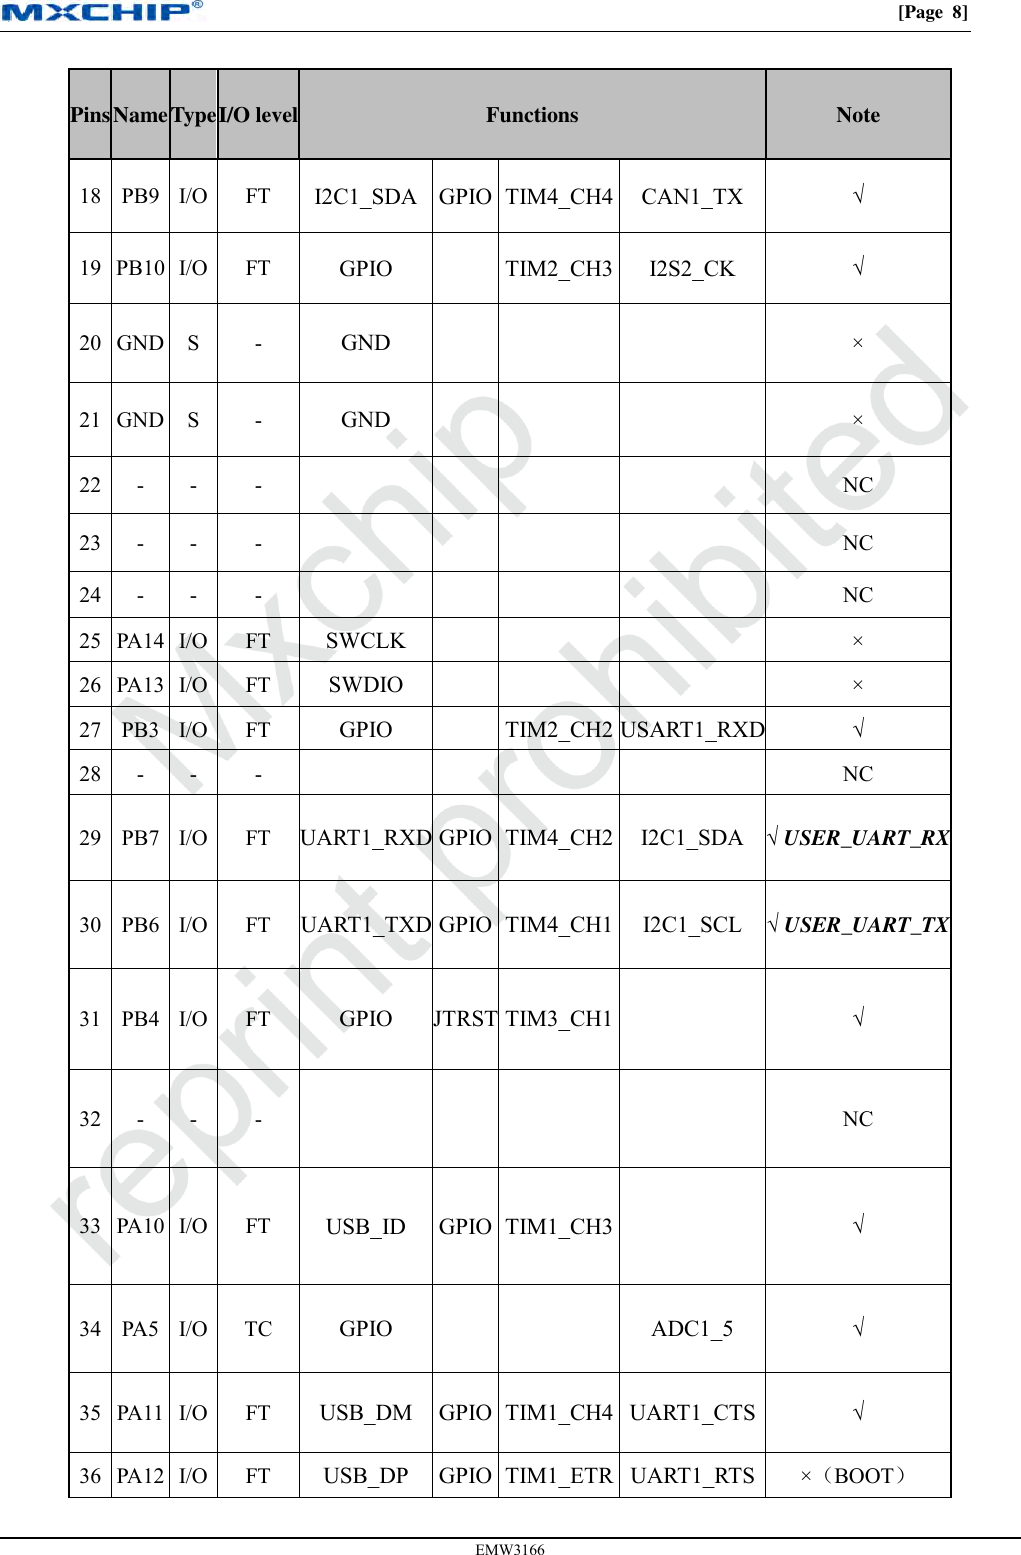 [Page  8] EMW3166 Pins Name Type I/O level Functions Note 18 PB9 I/O FT I2C1_SDA GPIO TIM4_CH4 CAN1_TX √ 19 PB10 I/O FT GPIO TIM2_CH3 I2S2_CK √ 20 GND S - GND × 21 GND S - GND × 22 - - - NC 23 - - - NC 24 - - - NC 25 PA14 I/O FT SWCLK × 26 PA13 I/O FT SWDIO × 27 PB3 I/O FT GPIO  TIM2_CH2 USART1_RXD √ 28 - - - NC 29 PB7 I/O FT UART1_RXD GPIO  TIM4_CH2 I2C1_SDA √USER_UART_RX30 PB6 I/O FT UART1_TXD GPIO TIM4_CH1 I2C1_SCL √USER_UART_TX31 PB4 I/O FT GPIO JTRST TIM3_CH1 √ 32 - - - NC 33 PA10 I/O FT USB_ID GPIO TIM1_CH3 √ 34 PA5 I/O TC GPIO ADC1_5 √ 35 PA11 I/O FT USB_DM GPIO TIM1_CH4 UART1_CTS √ 36 PA12 I/O FT USB_DP GPIO TIM1_ETR UART1_RTS ×（BOOT） 